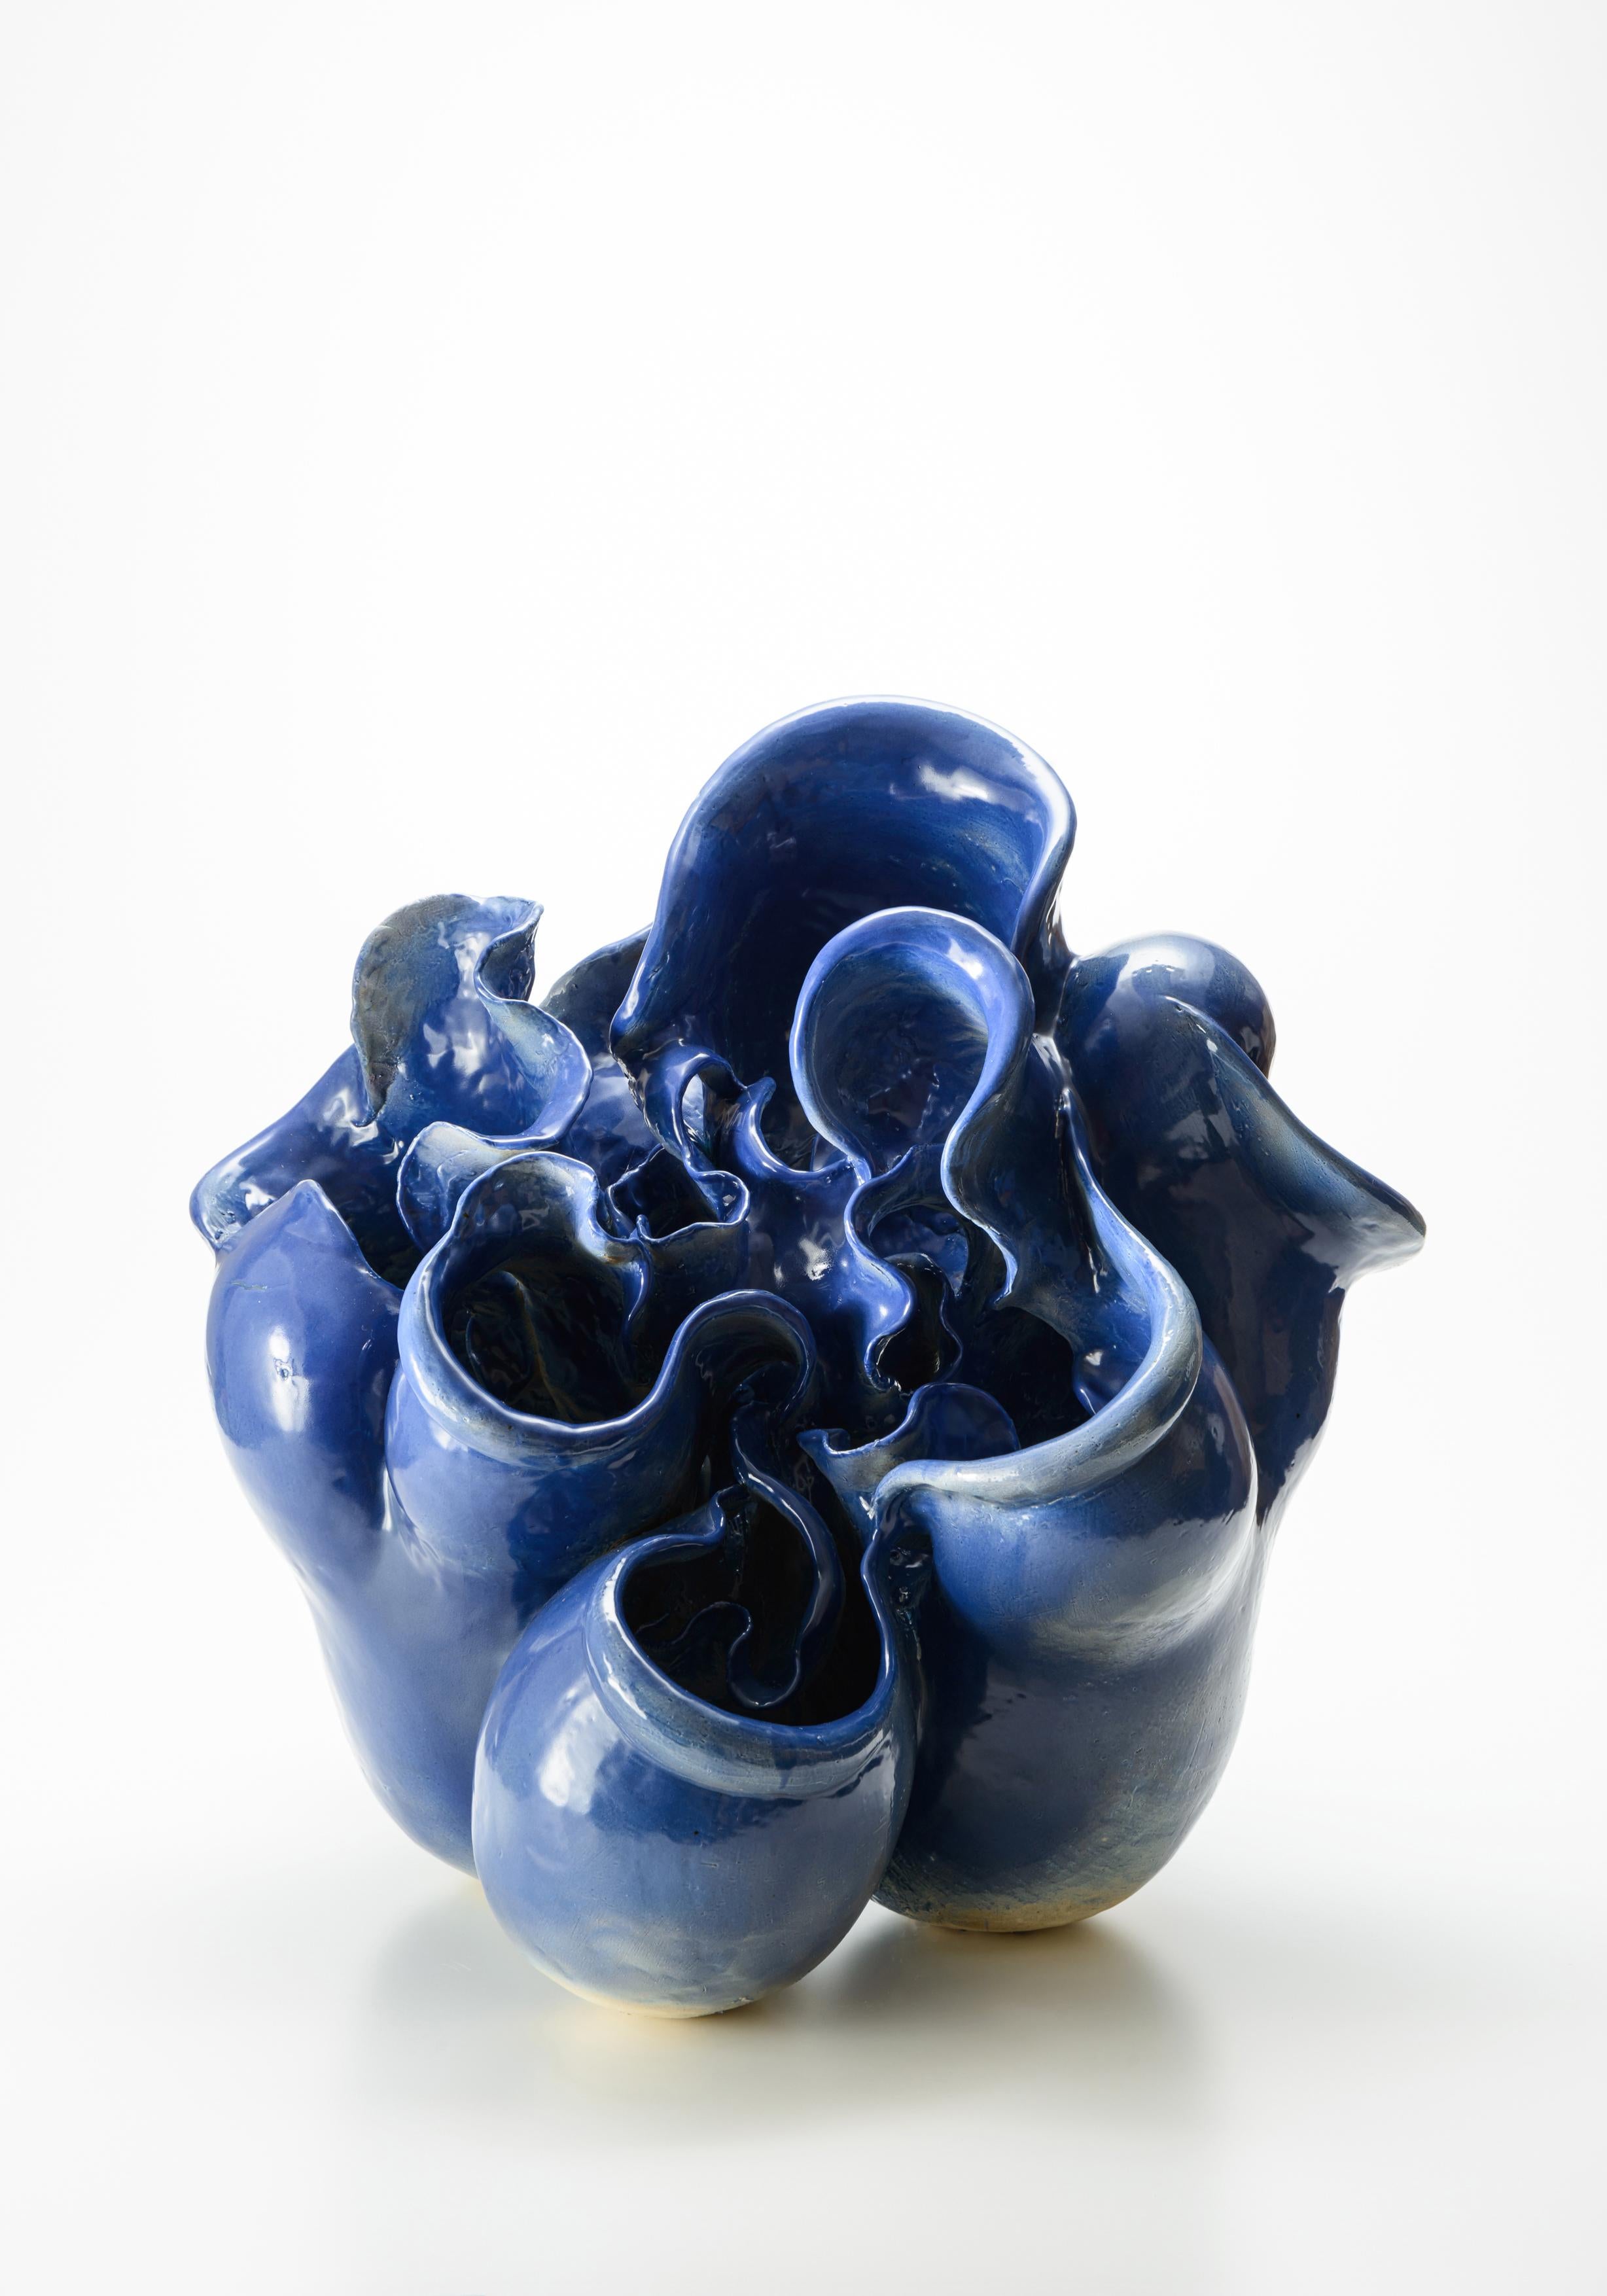 Aya Mori Abstract Sculpture - "Water Shell", Abstract Ceramic Sculpture with Dynamic Composition, Porcelain